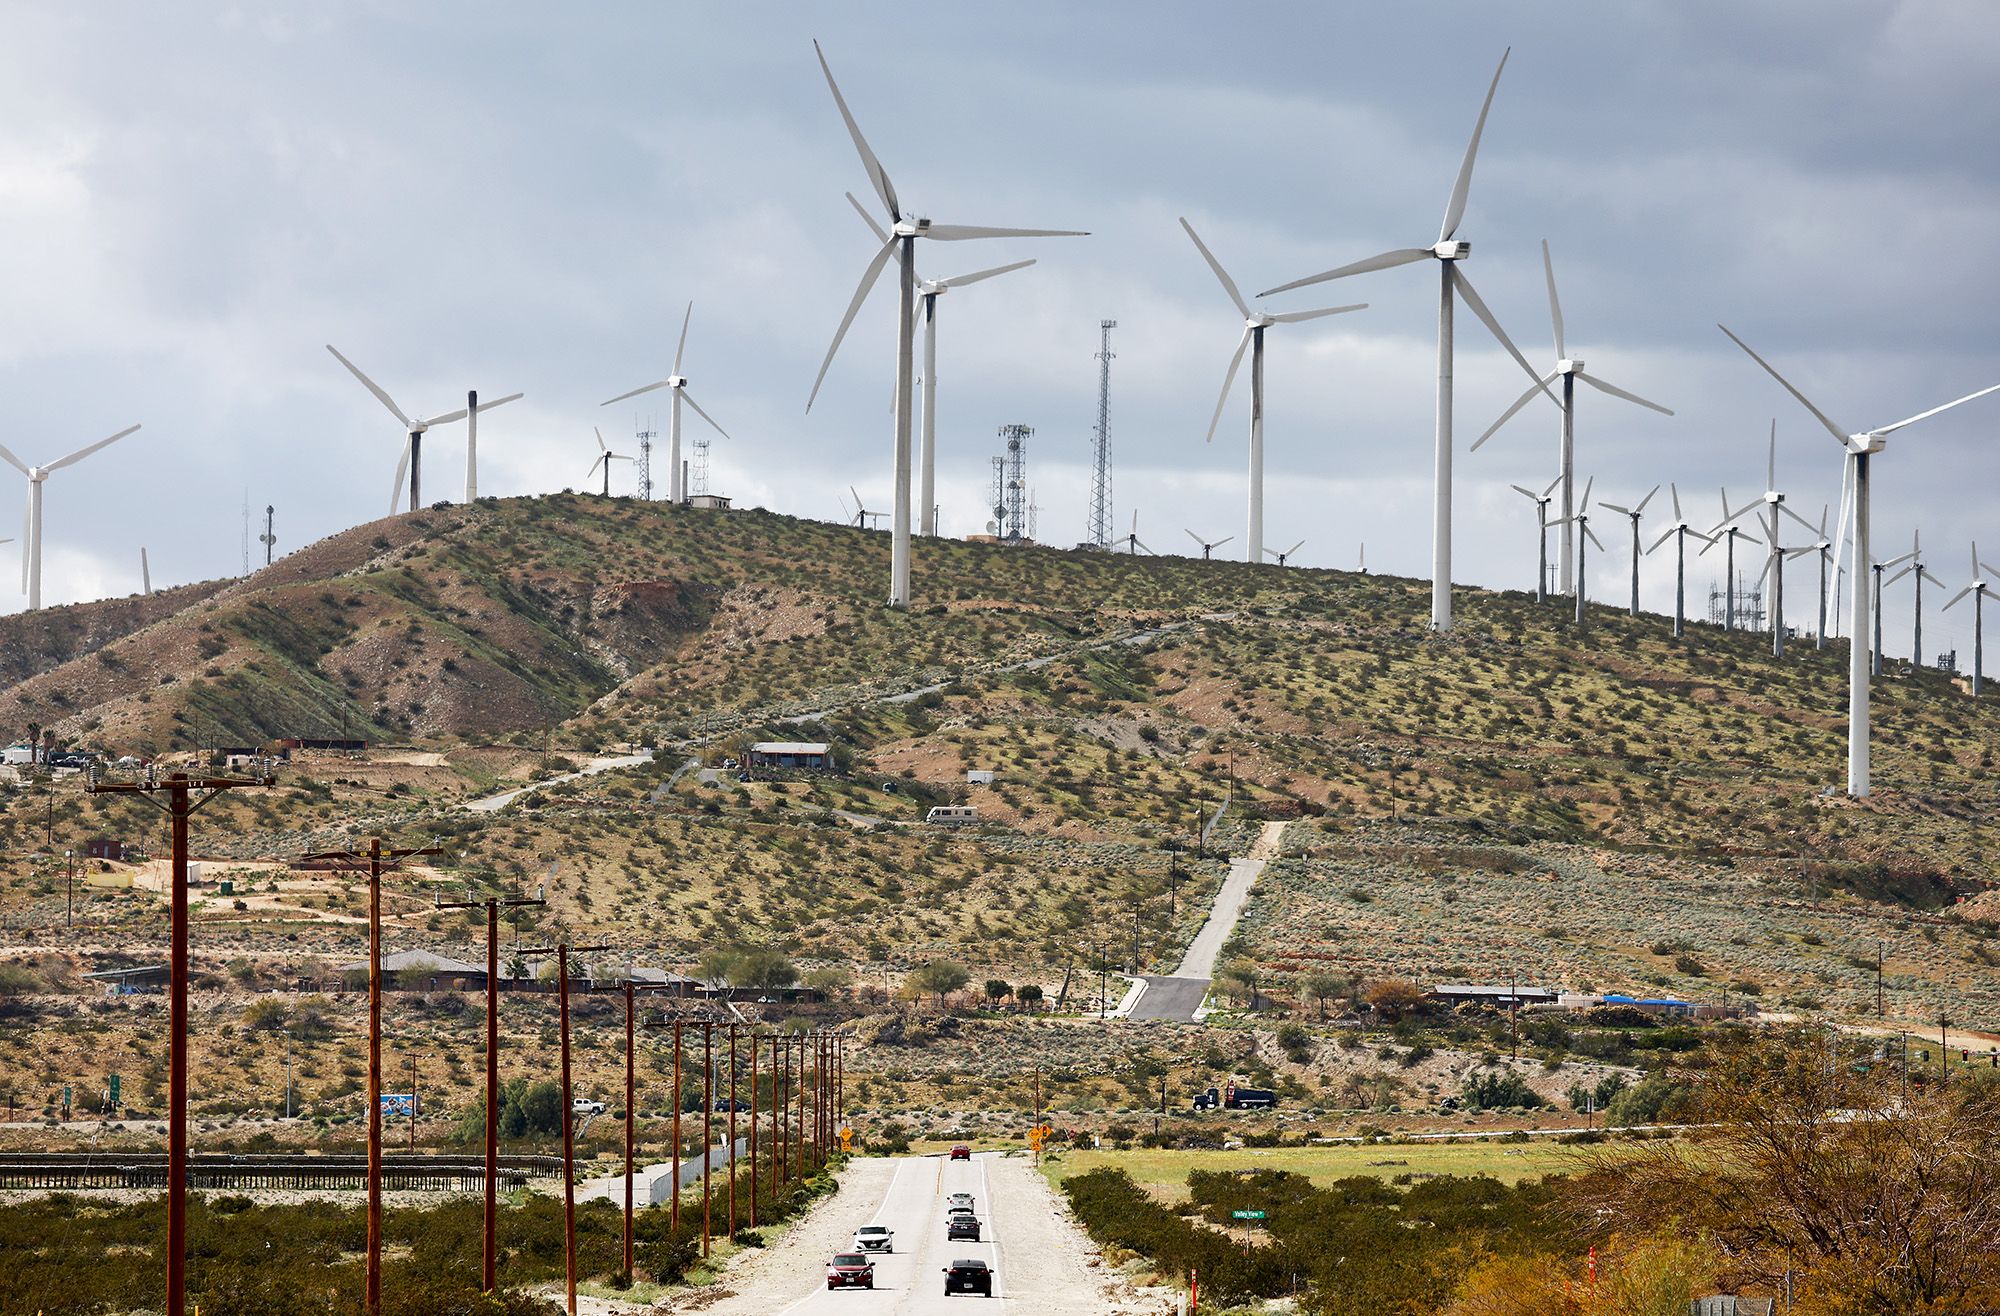 WHITEWATER, CALIFORNIA - FEBRUARY 22: Wind turbines operate at a wind farm, a key power source for the Coachella Valley, as vehicles drive on February 22, 2023 near Whitewater, California. Wind turbines in California provide enough energy to power more than 2 million homes while the International Energy Agency (IEA) predicts renewable energy will account for 35 percent of worldwide power generation in 2025. (Photo by Mario Tama/Getty Images)